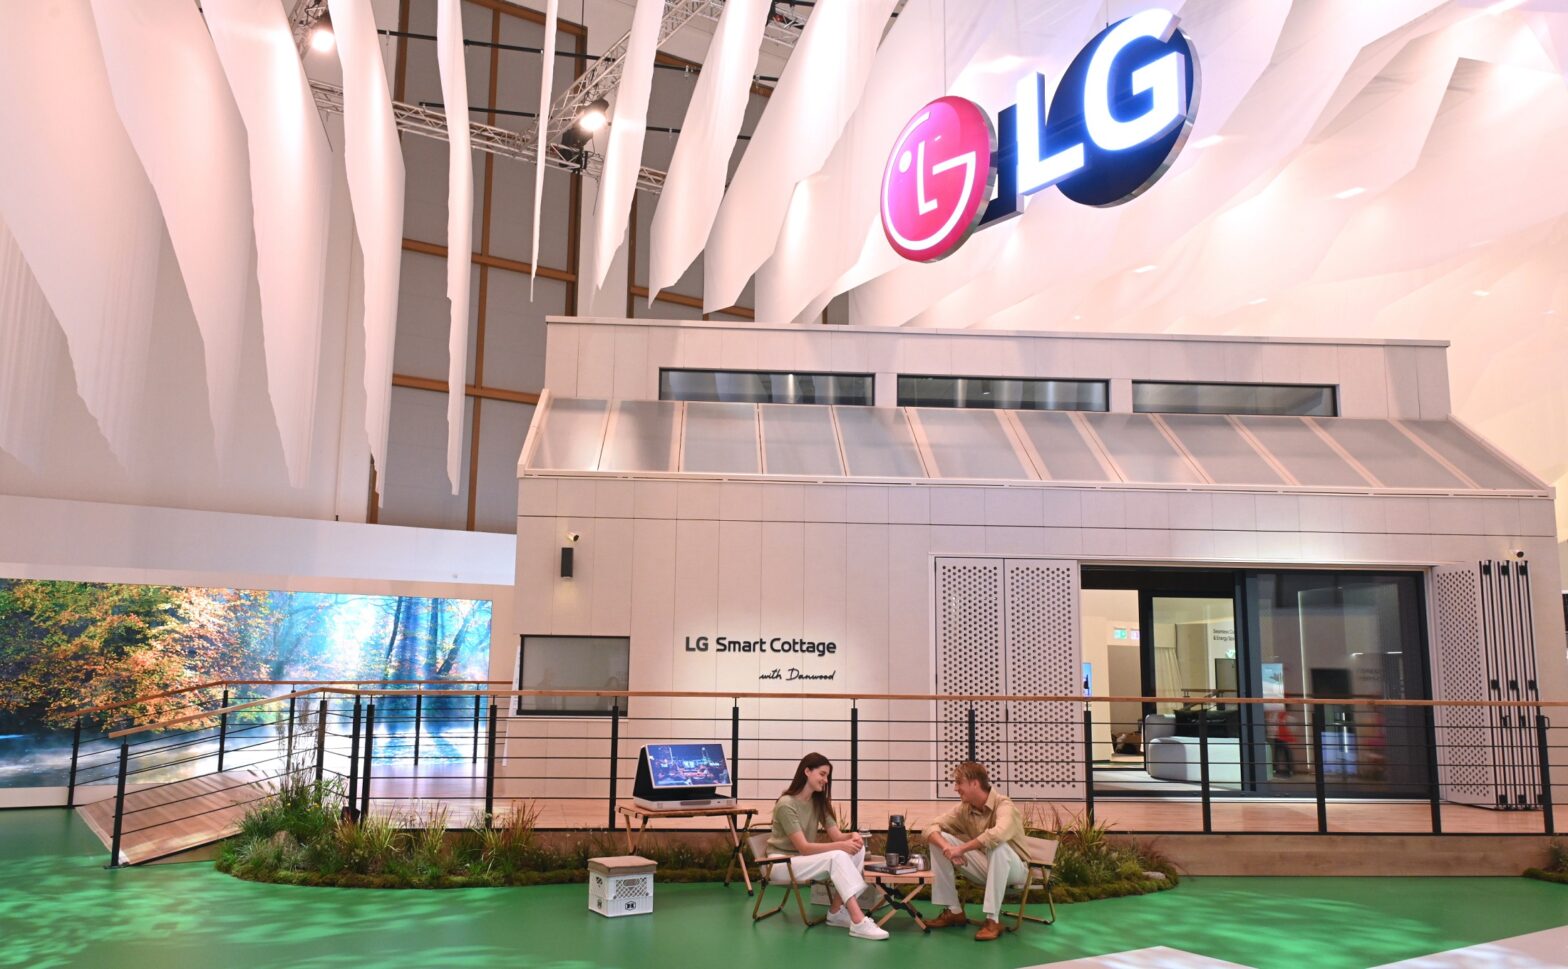 LG Delivers 'Sustainable Life, Joy for All' With Latest Home Solutions